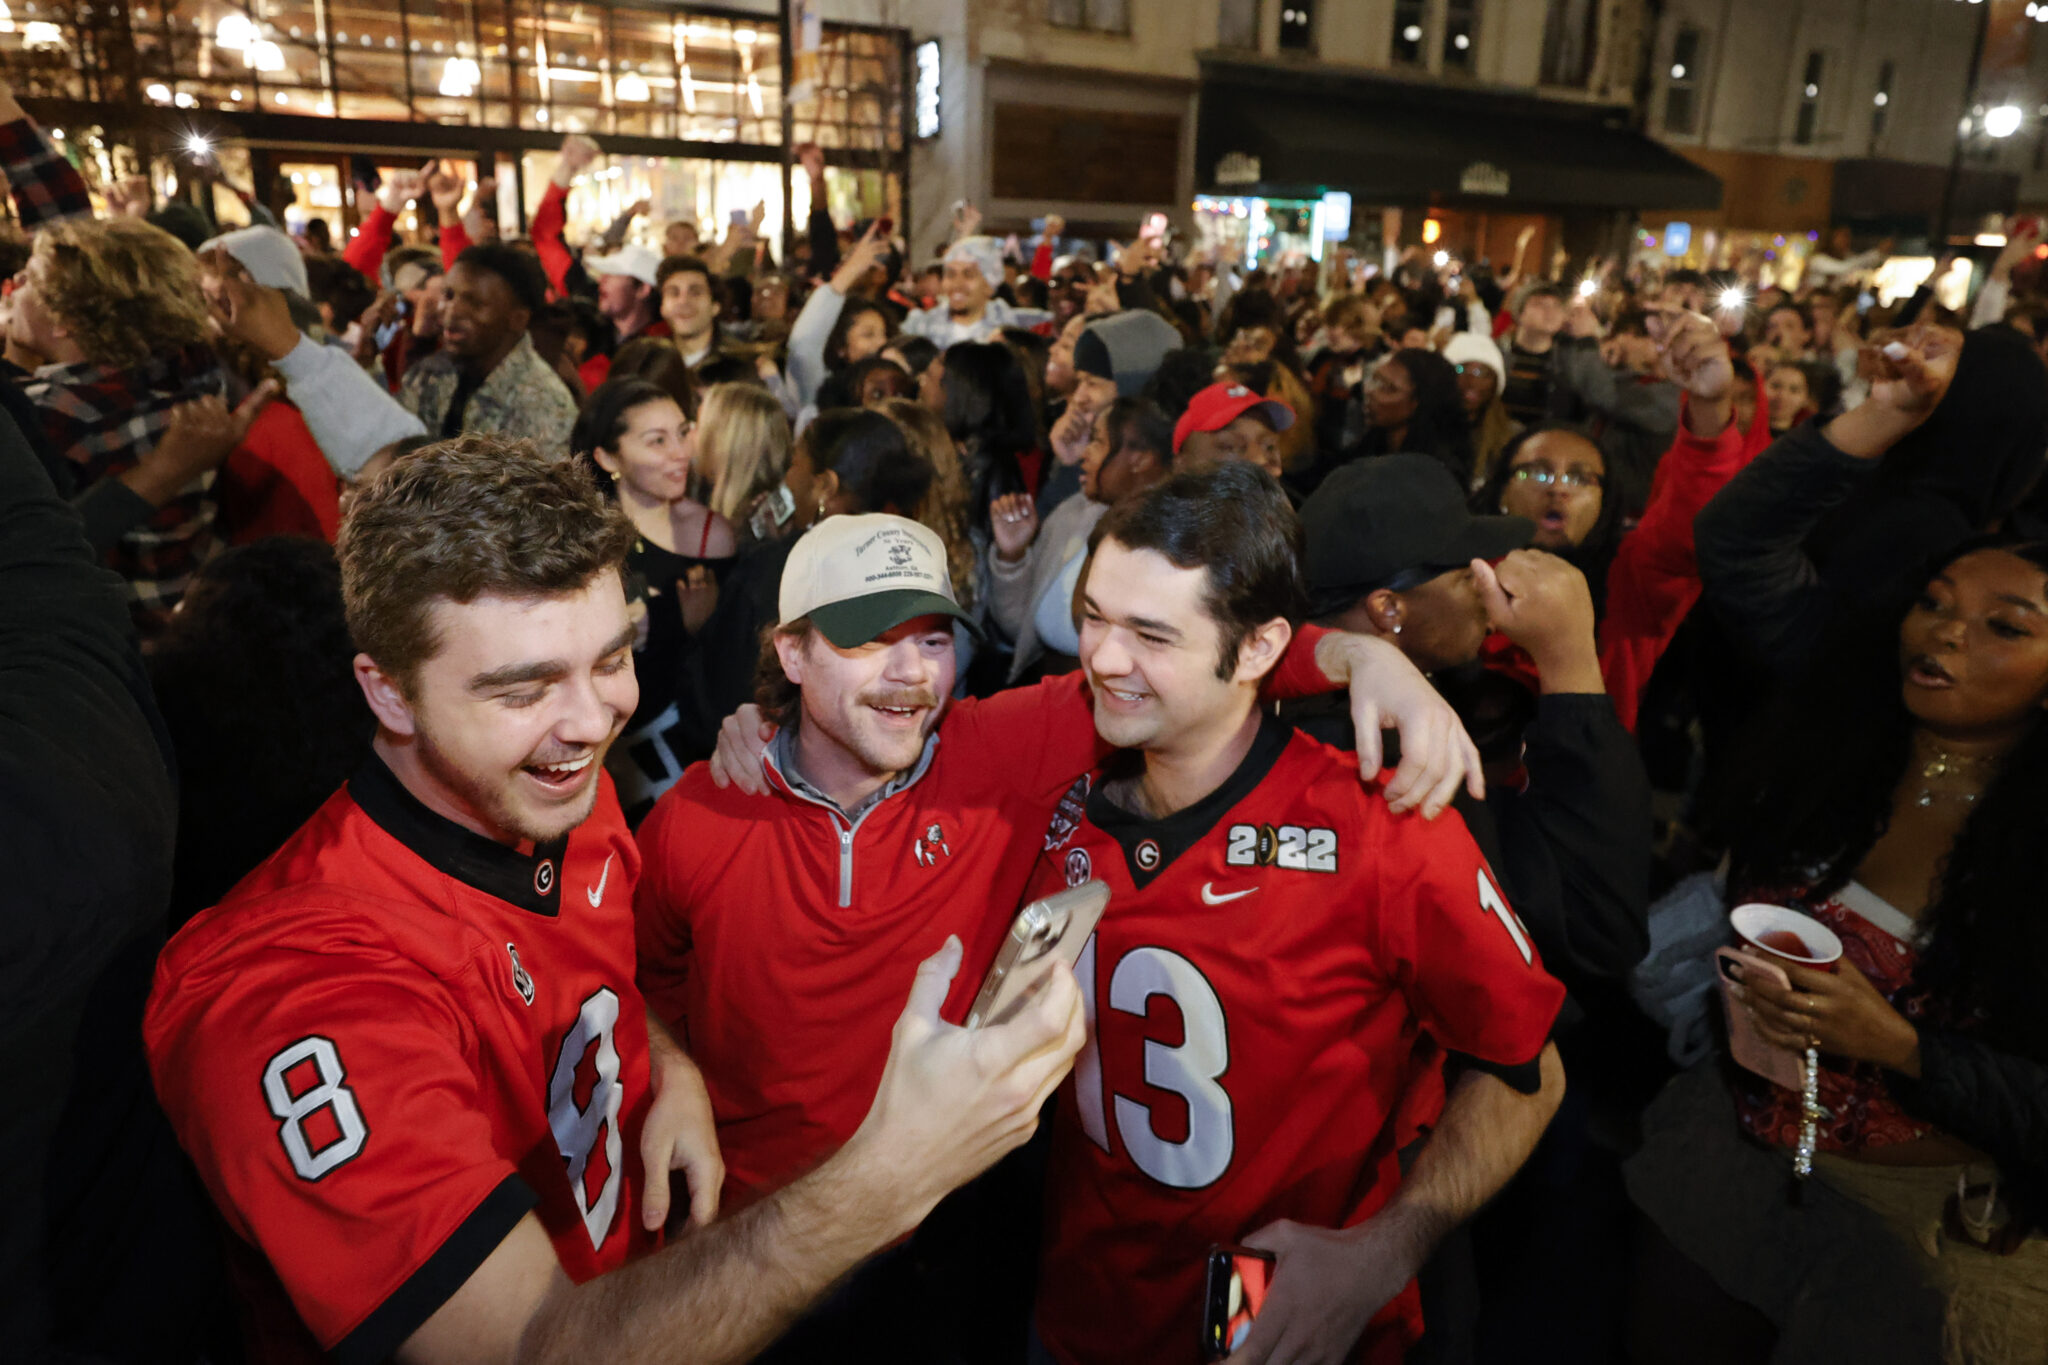 University of Georgia students celebrate in the streets after the College Football Playoff national championship game against TCU, Monday, Jan. 9, 2023, in Athens, Ga. (AP Photo/Alex Slitz)